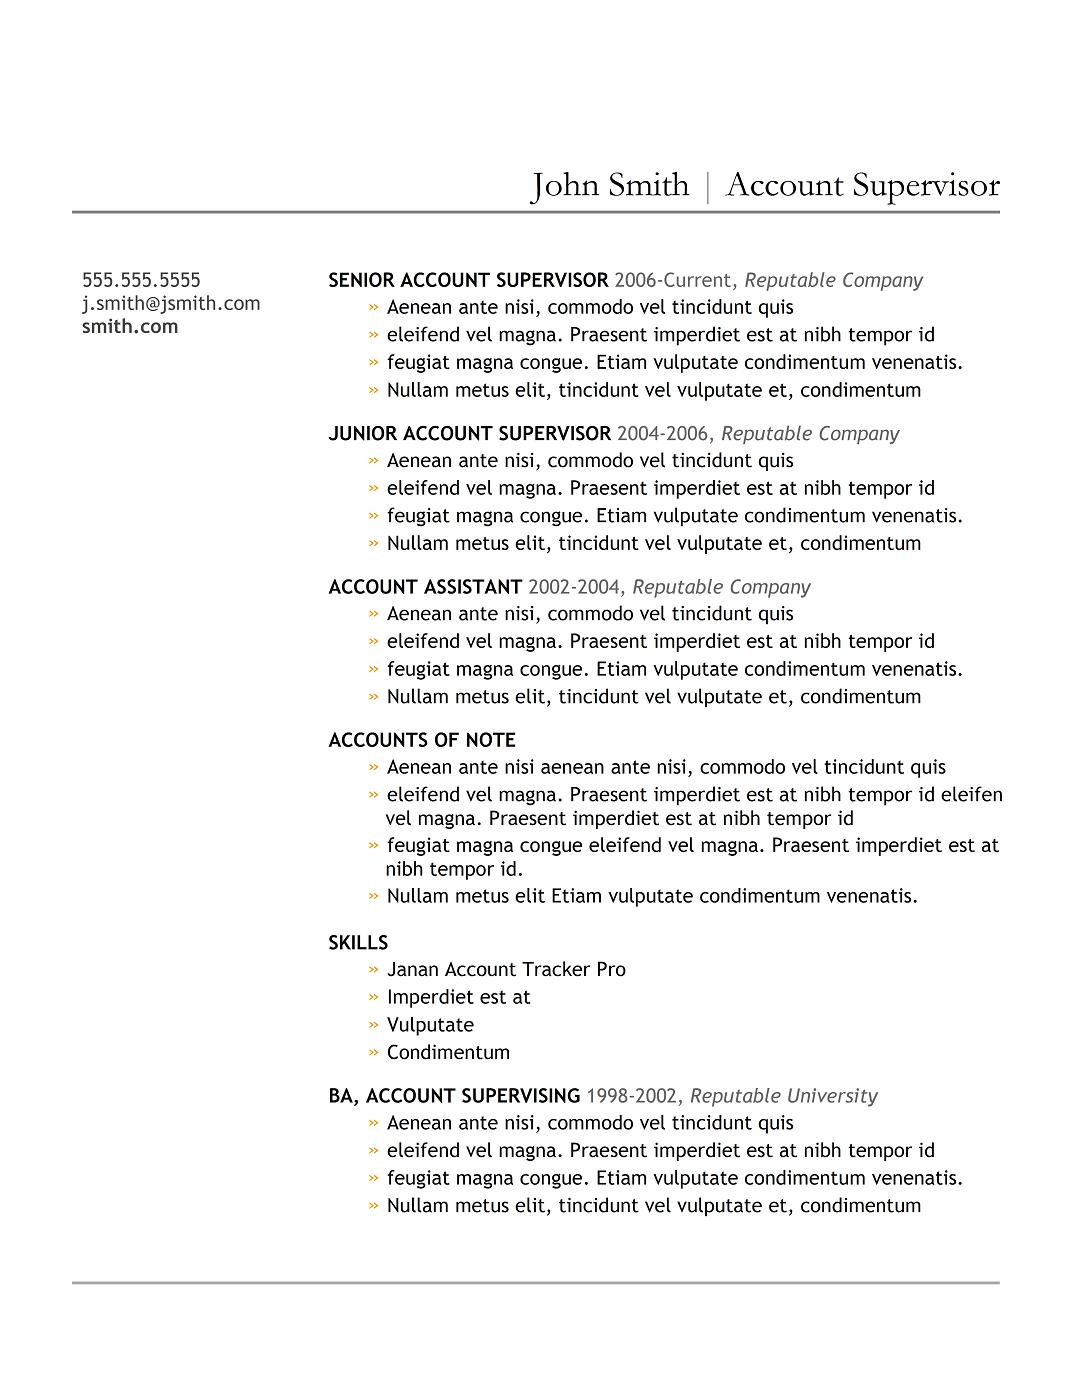 how to prepare a curriculum vitae templates free download